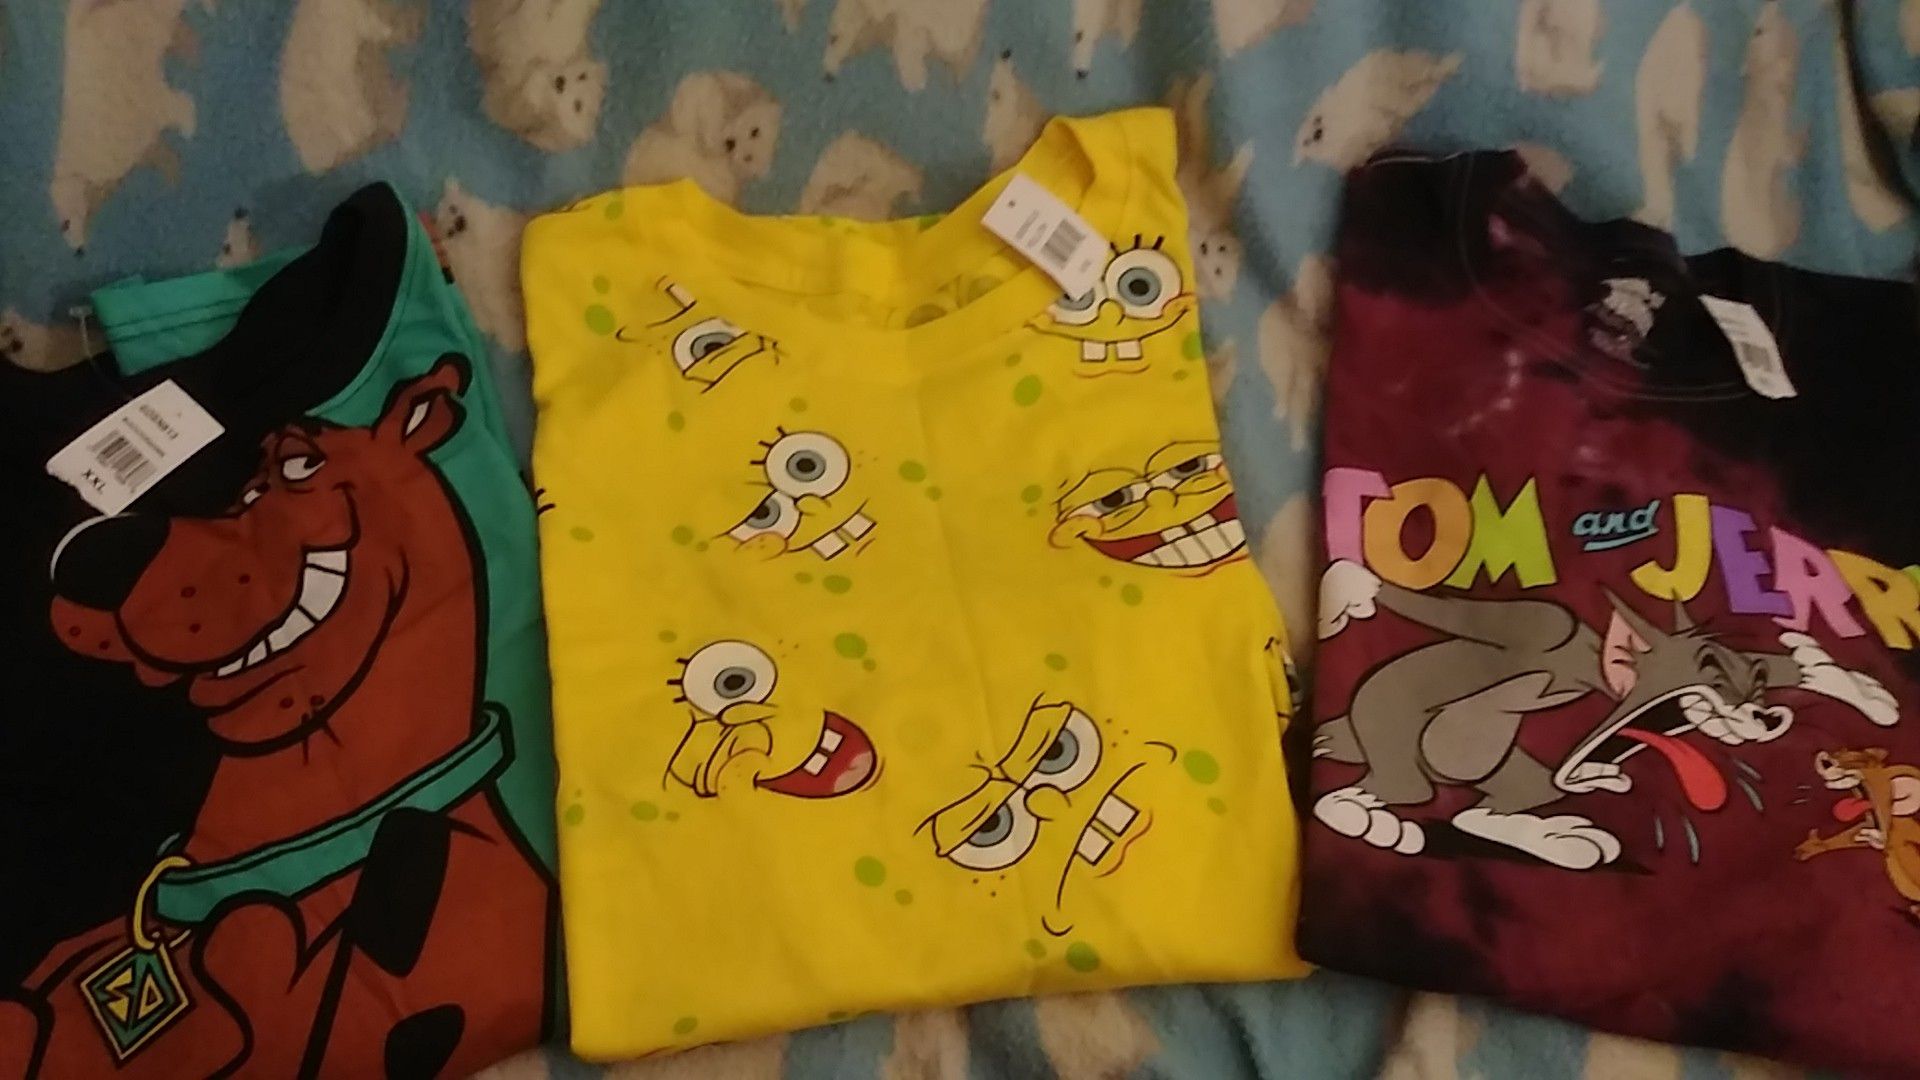 Character t shirts. Scooby doo. Spongebob and tom and jerry. Size 2X. Brand new.all for $15